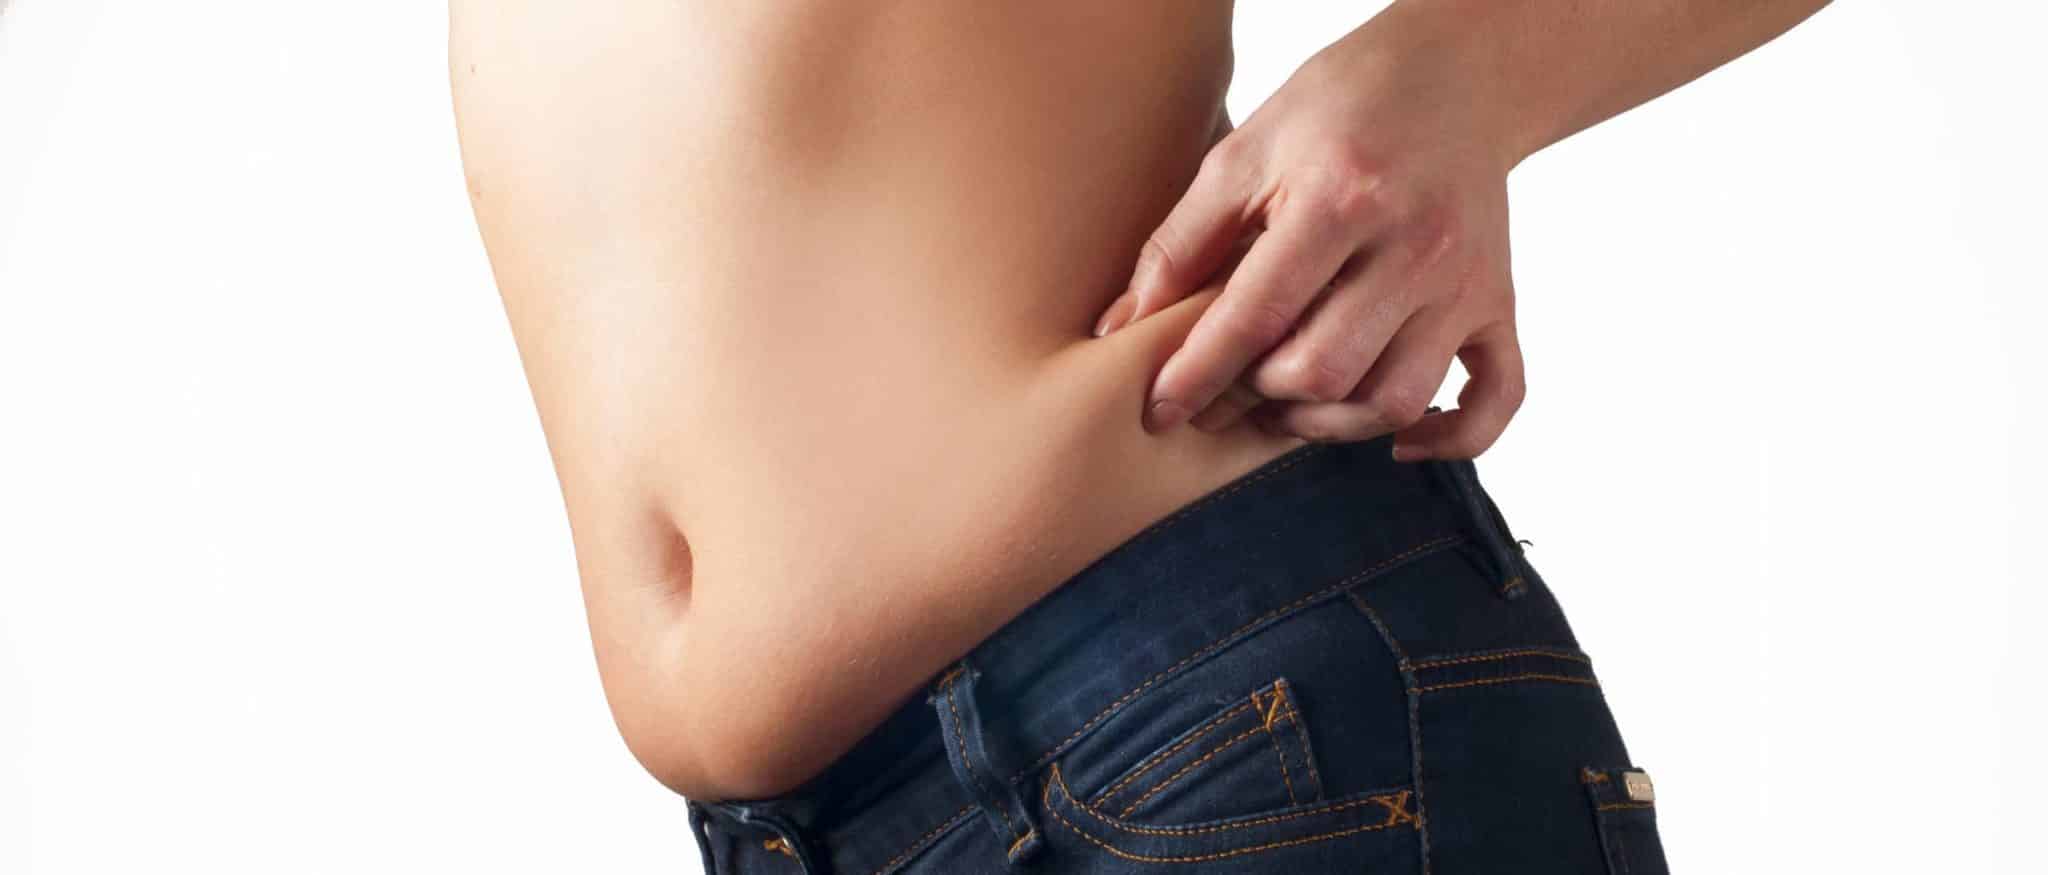 excess skin on abdomen, bmi for cosmetic surgery